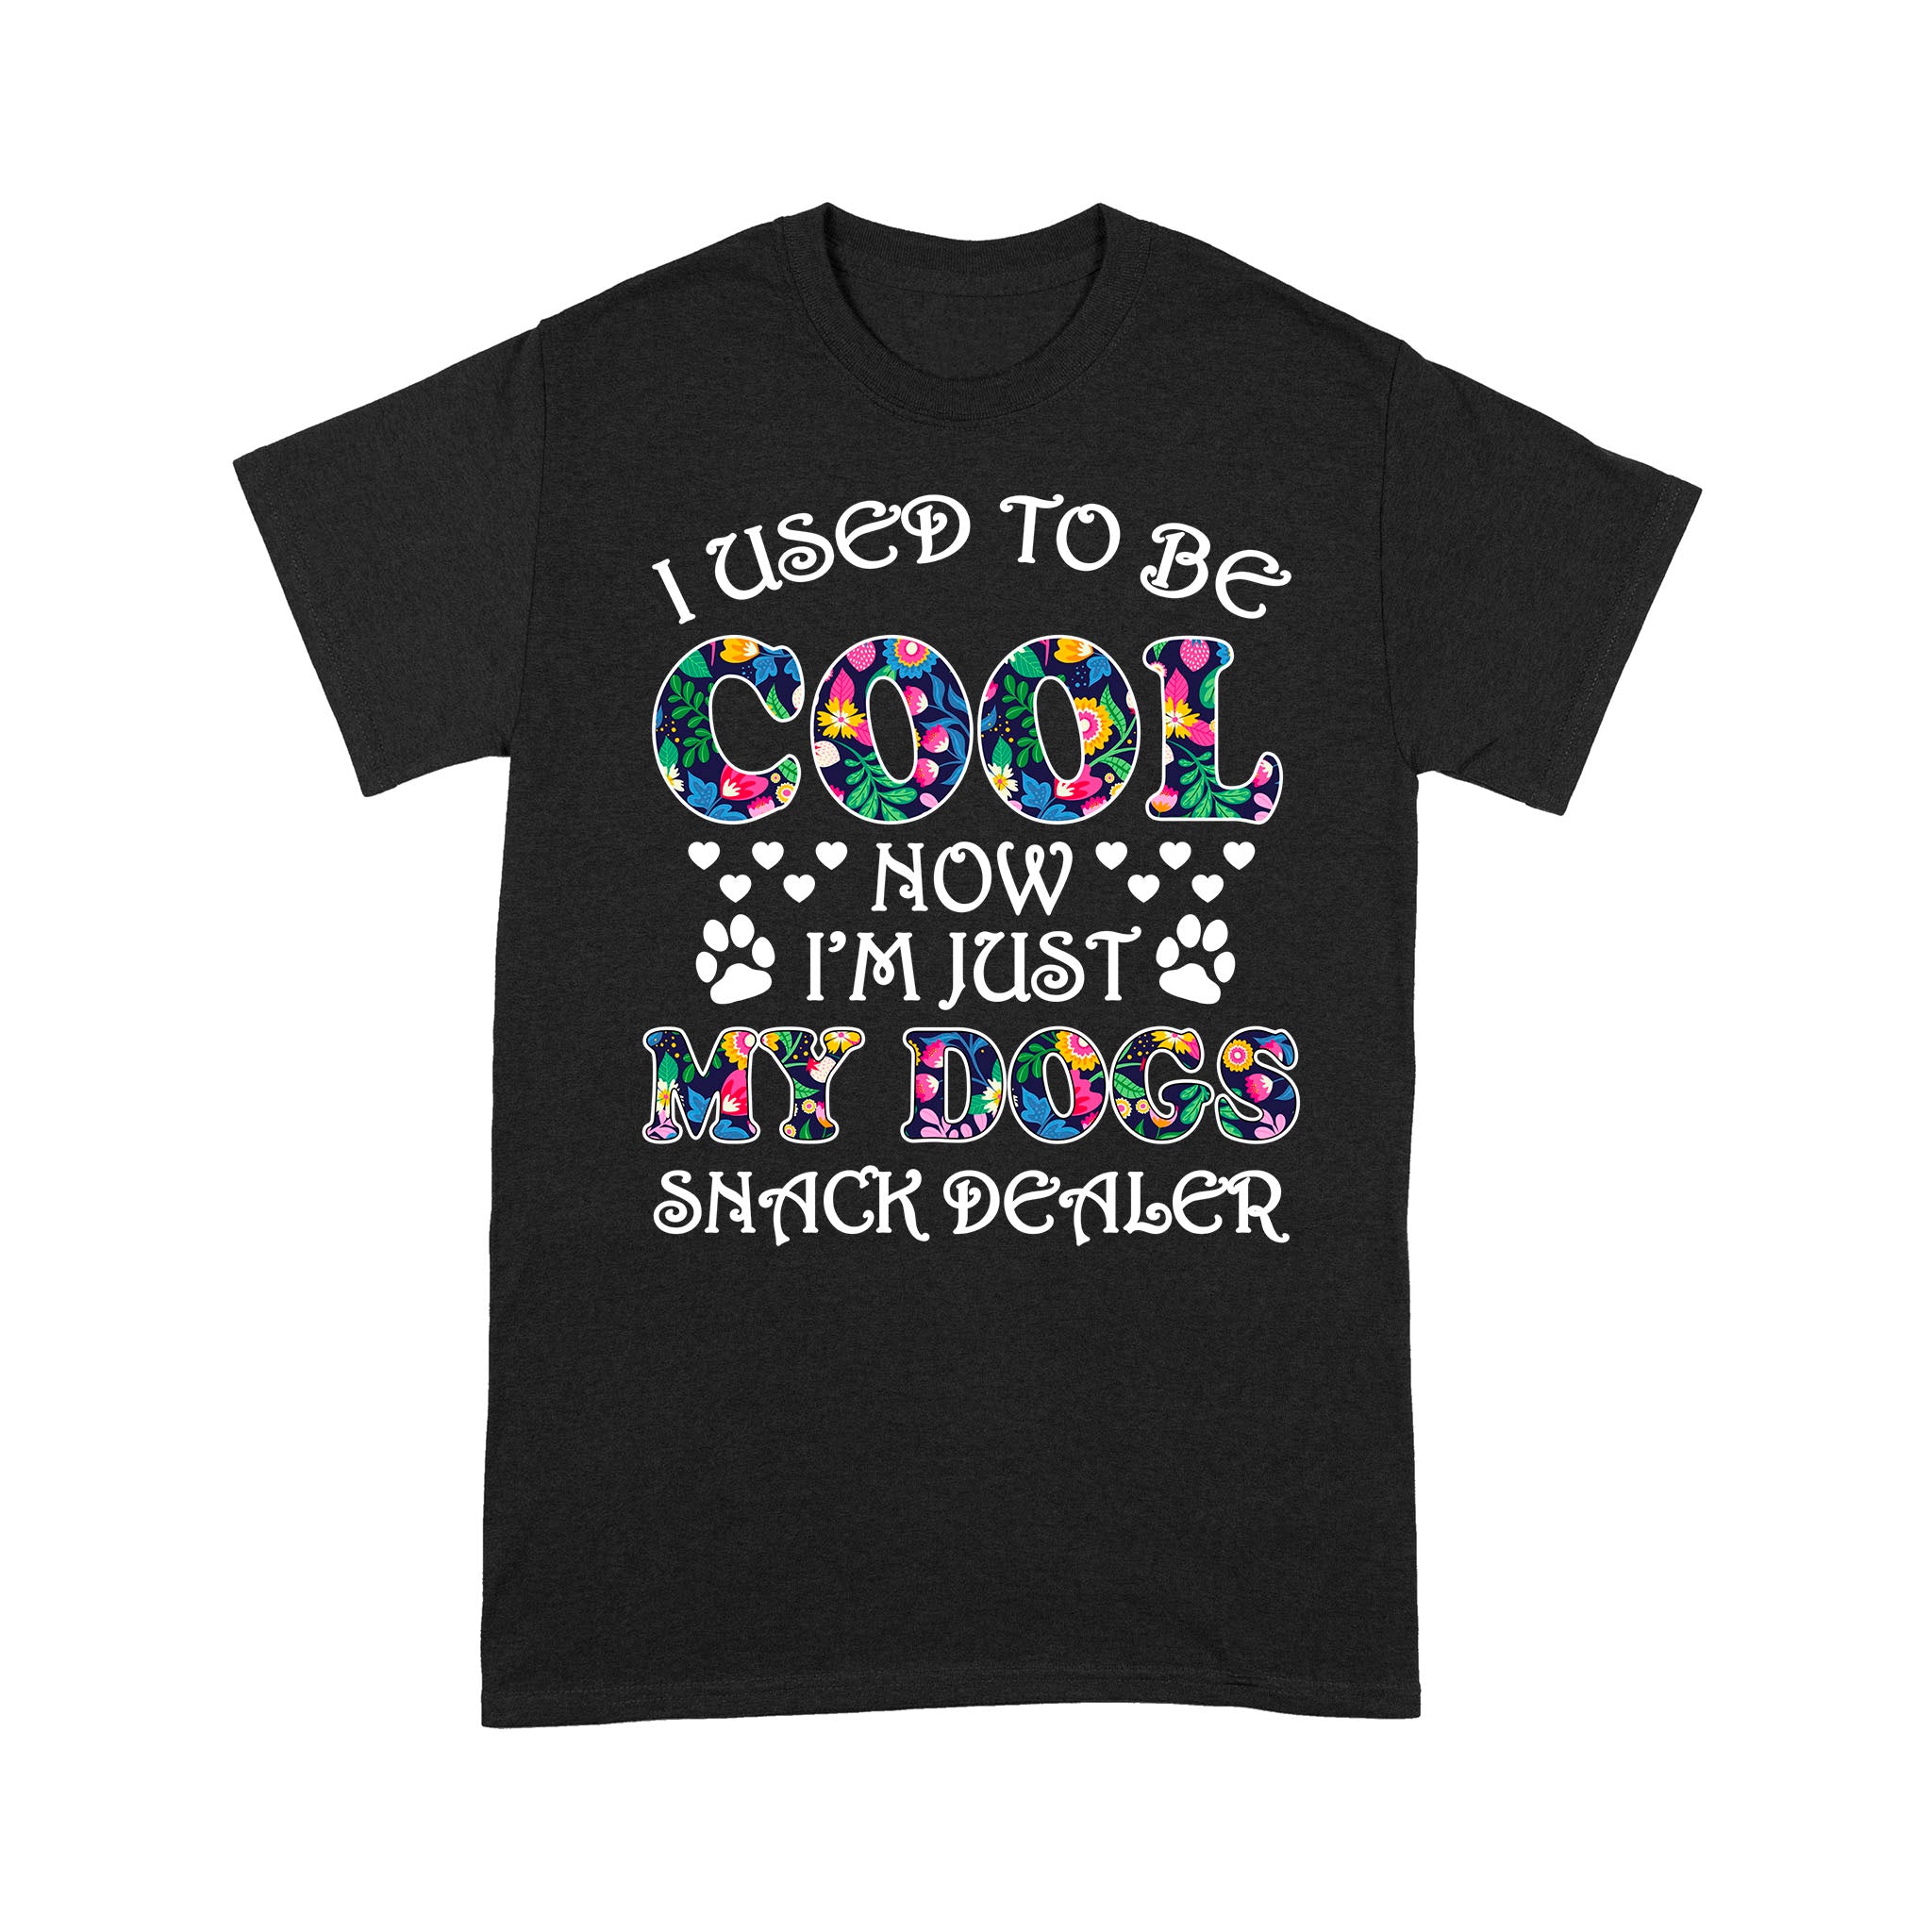 Snack Dealer - Funny T-shirt for Dog Owners, I Used to Be Cool, Dog Mom, Dog Dad Shirt| NTS232